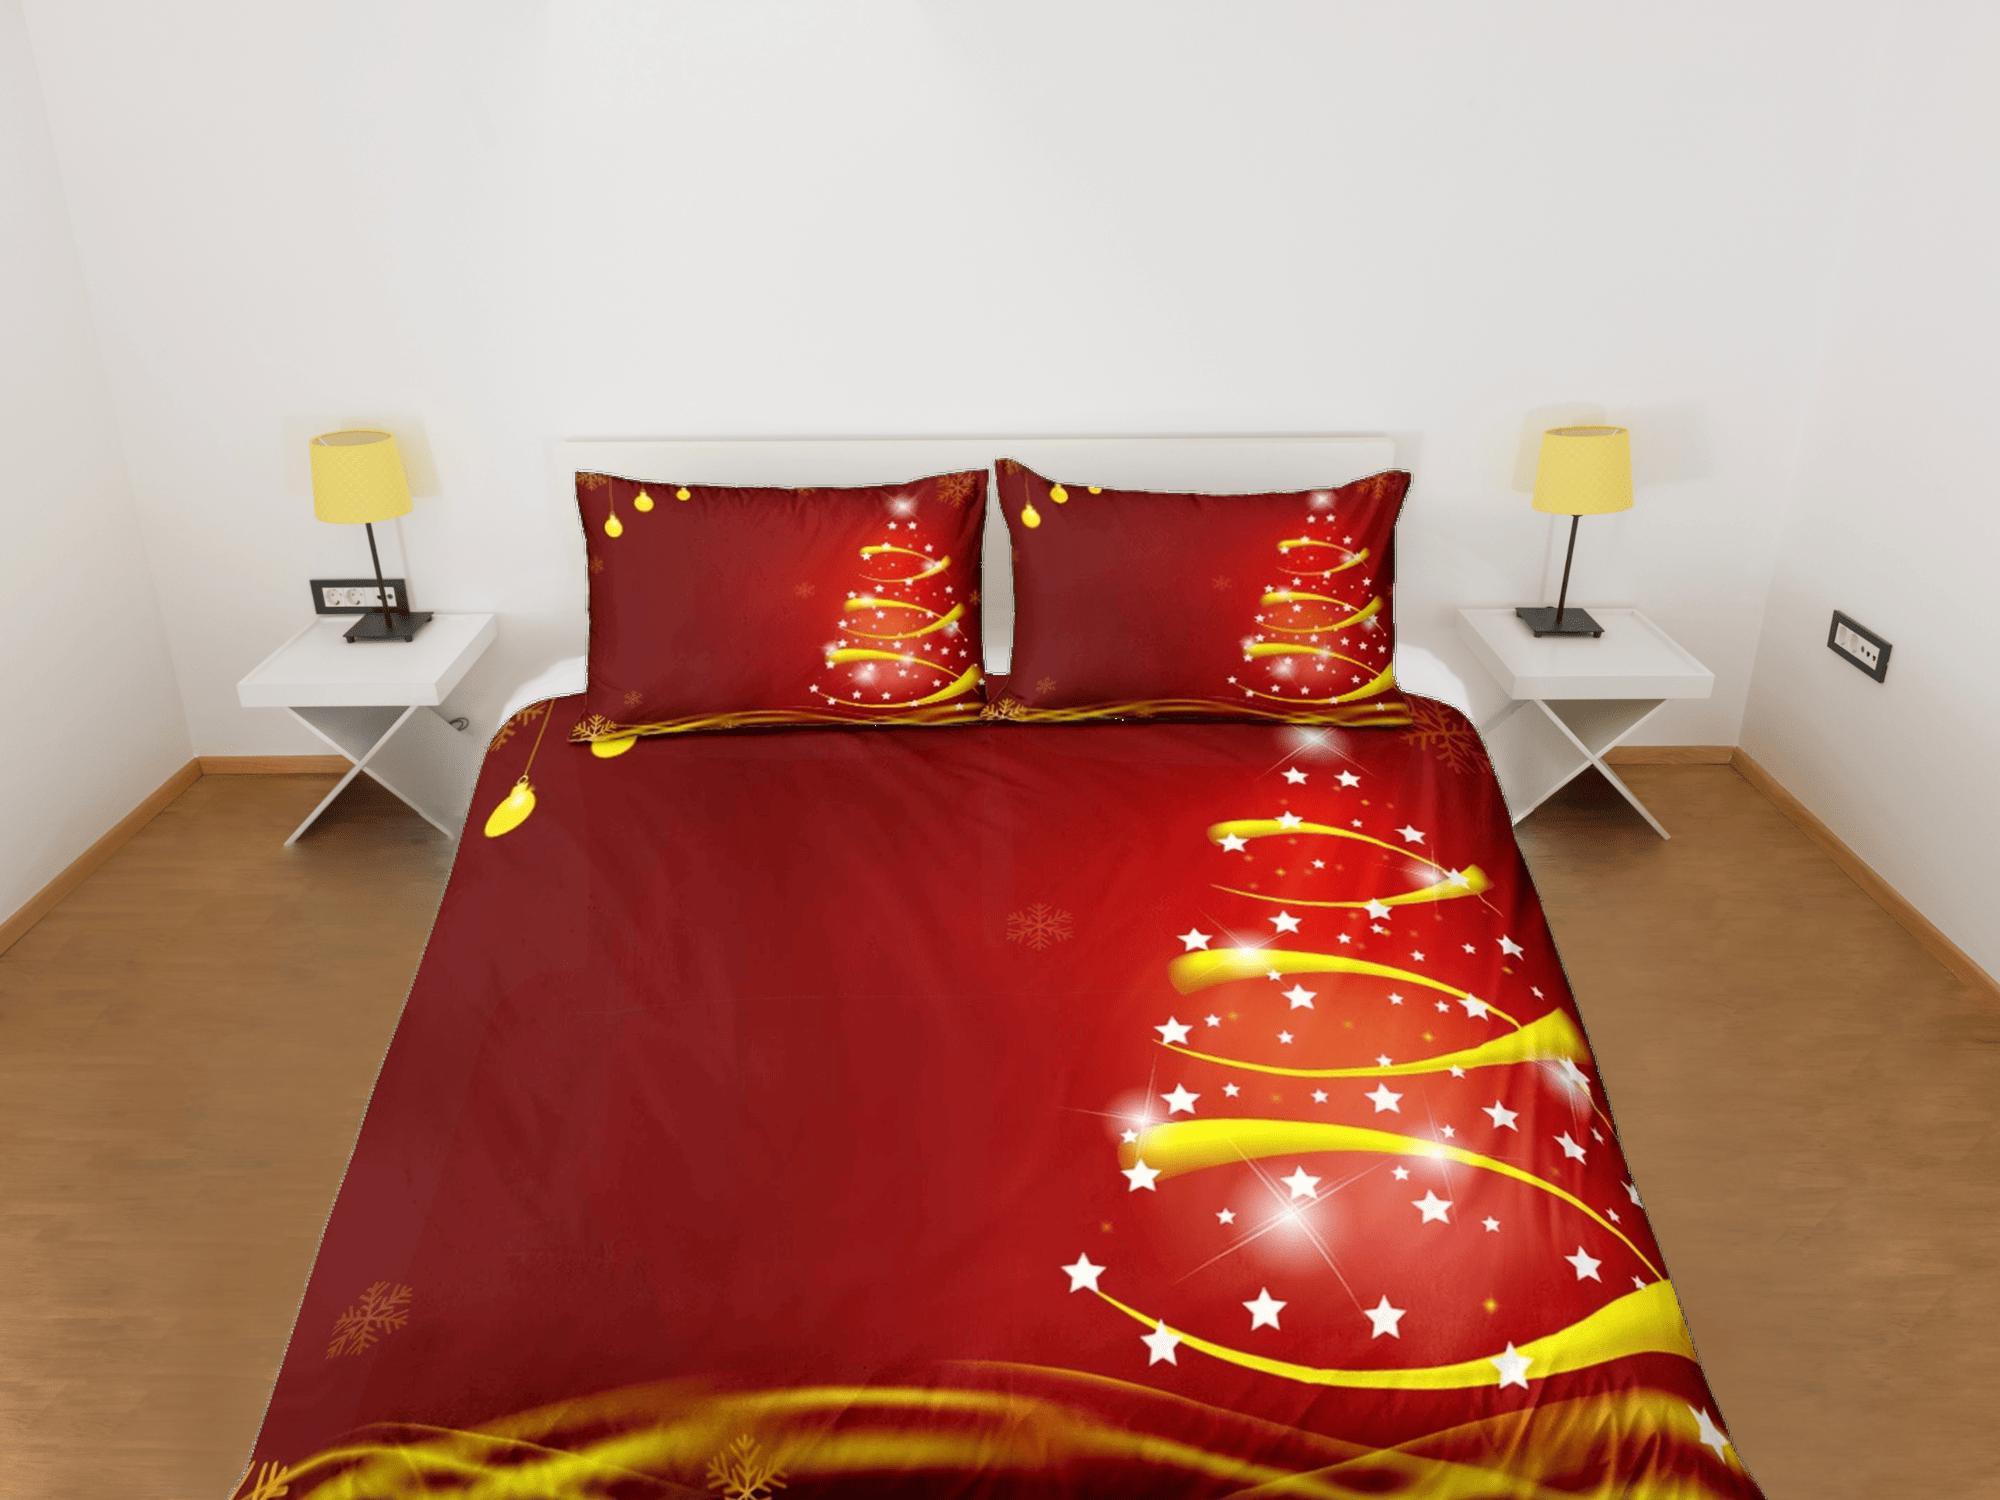 daintyduvet Red glowing Christmas tree bedding & pillowcase holiday gift duvet cover king queen full twin toddler bedding baby Christmas farmhouse decor